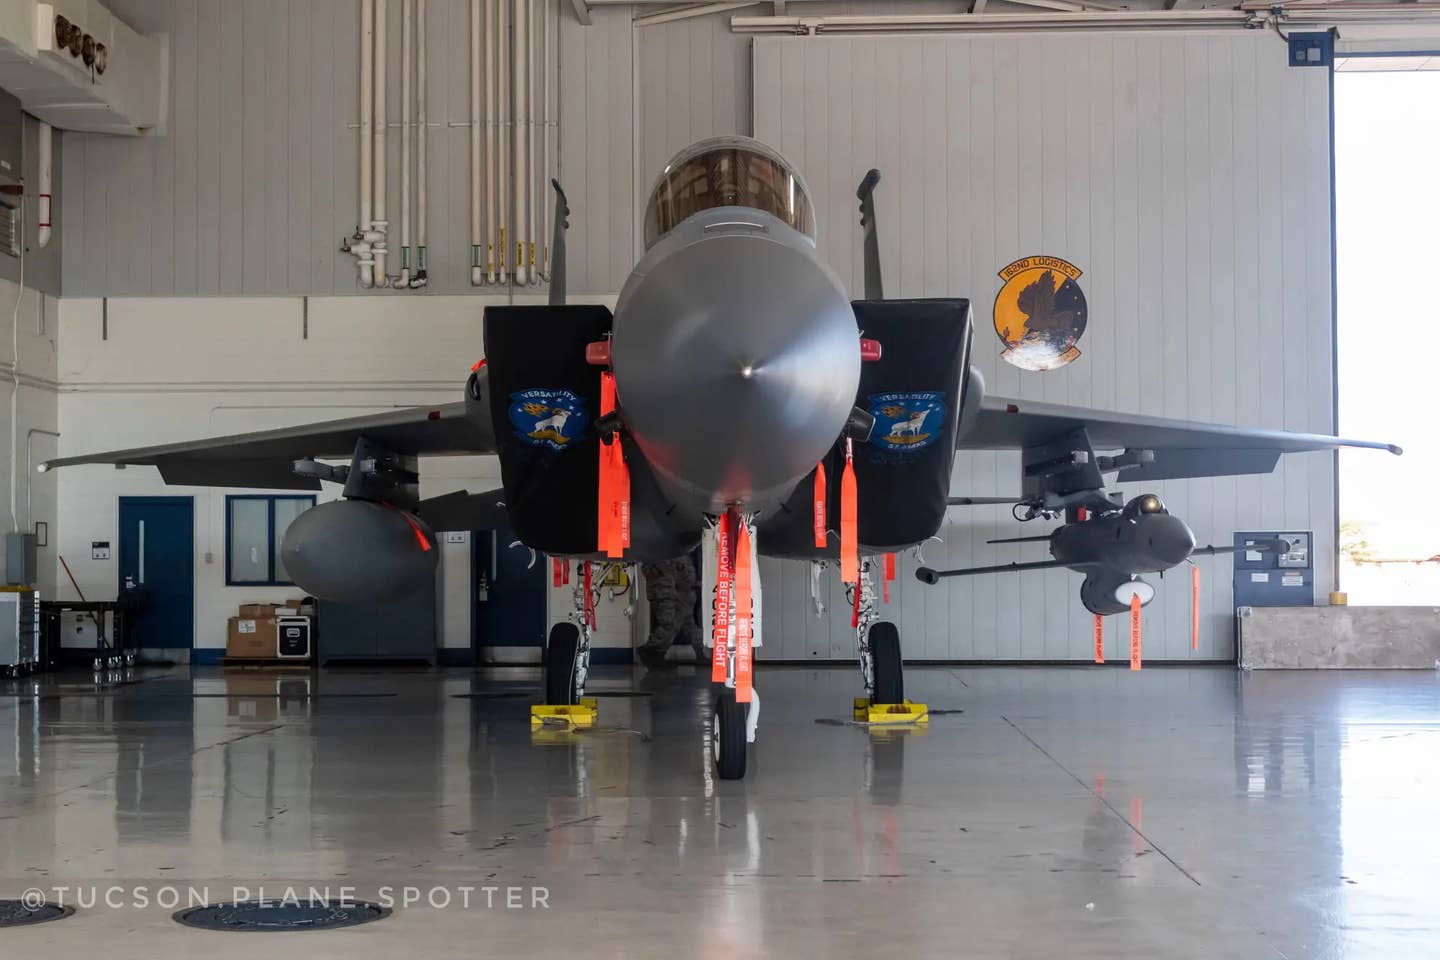 A picture showing an F-15C belonging to the Oregon Air National Guard's 142nd Fighter Wing with a Kratos UTAP-22 drone under its left wing. @tucson.plane.spotter